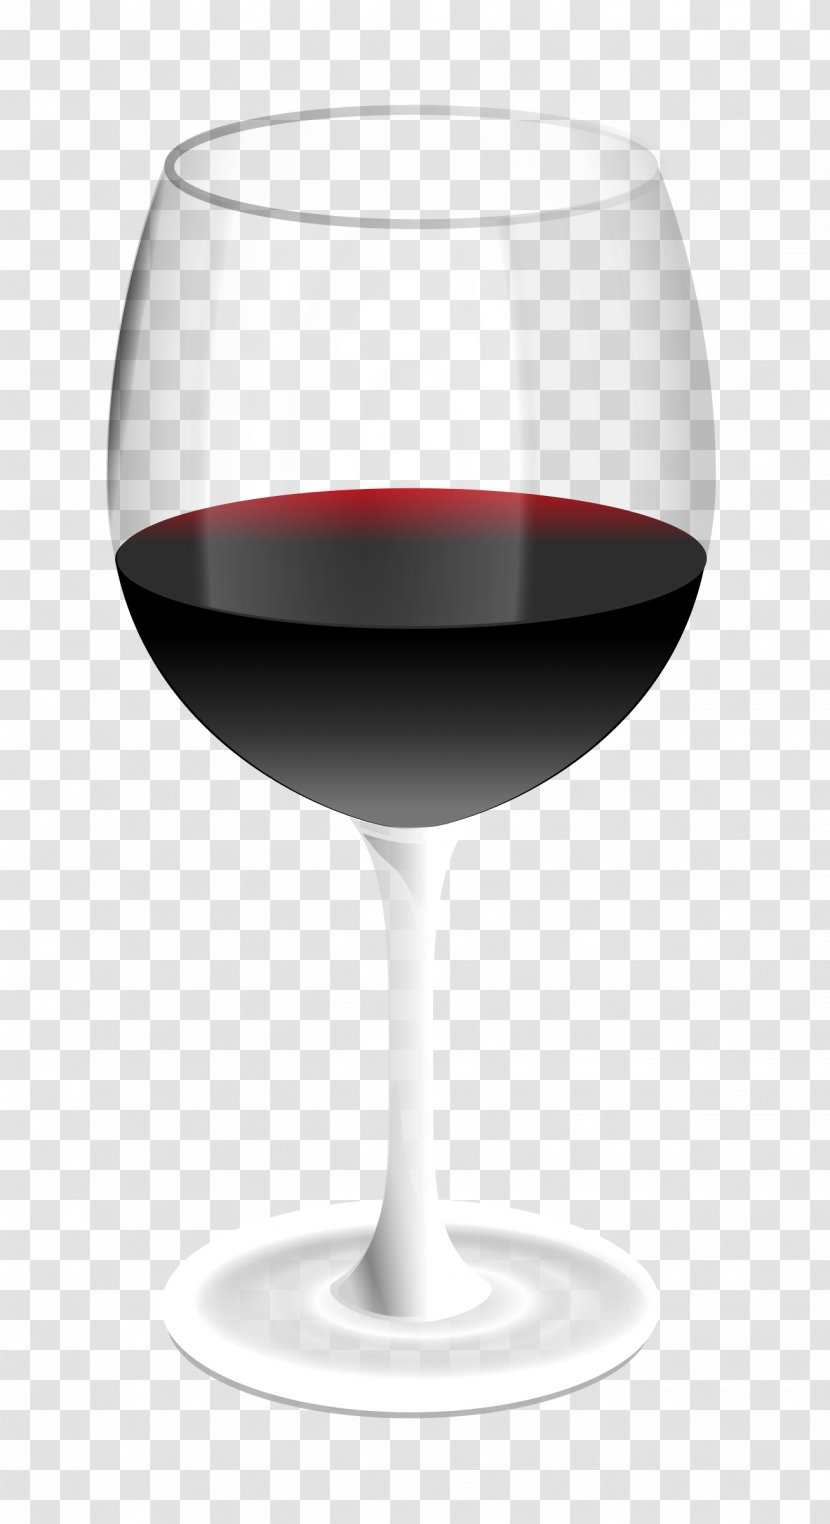 Red Wine Champagne Glass Clip Art - Tableware Transparent PNG